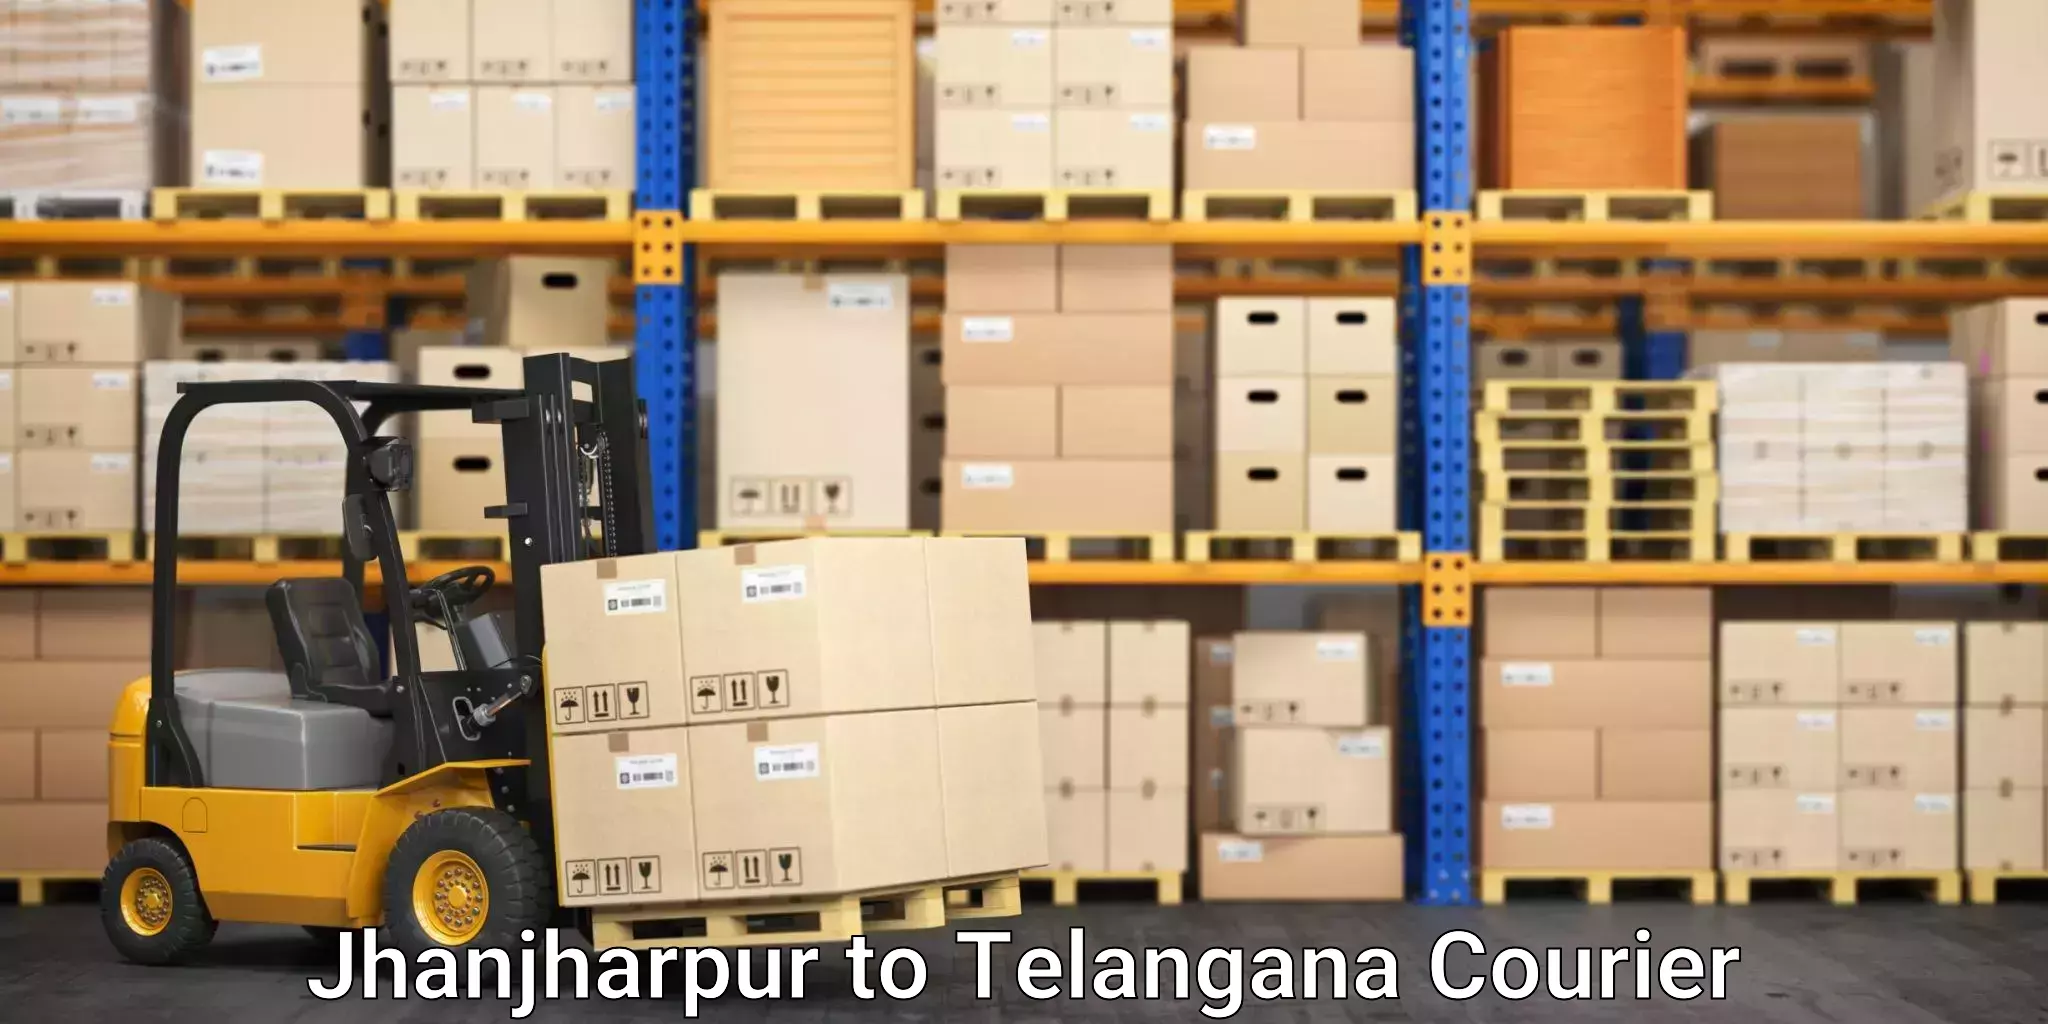 Reliable relocation services Jhanjharpur to Alair